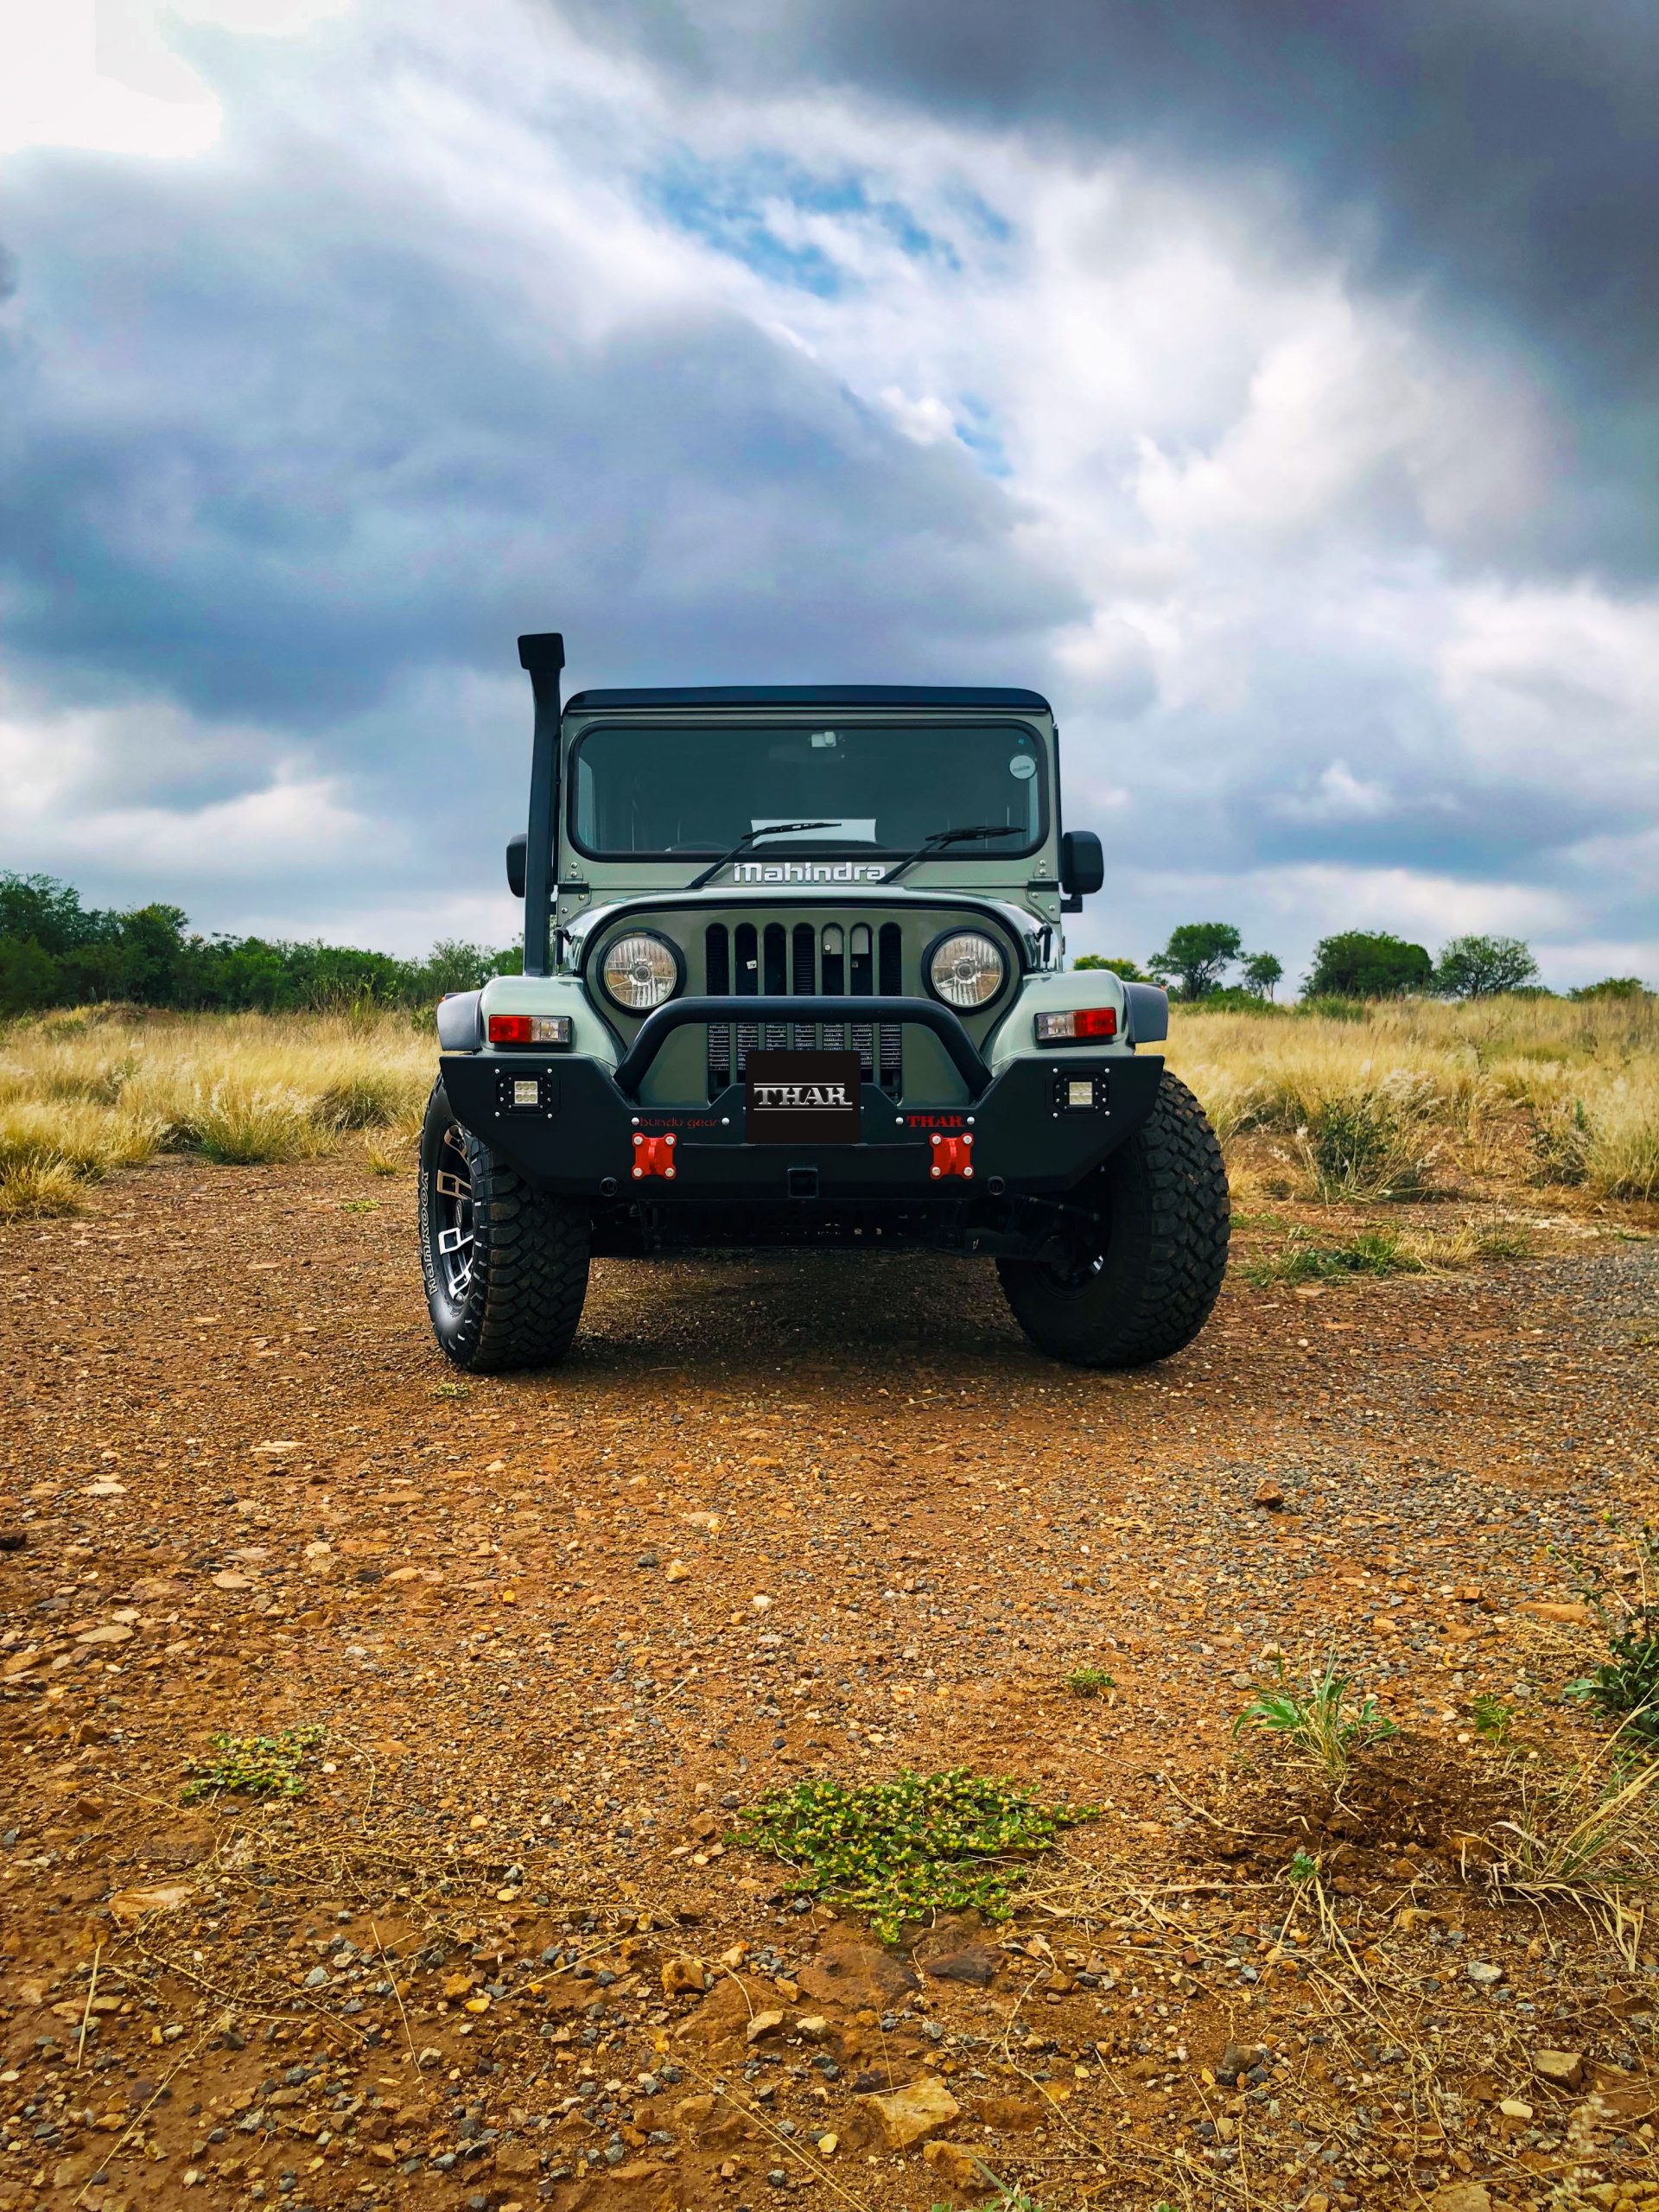 Mahindra Thar – The Company’s Most Iconic Off-Roader by Far!!!